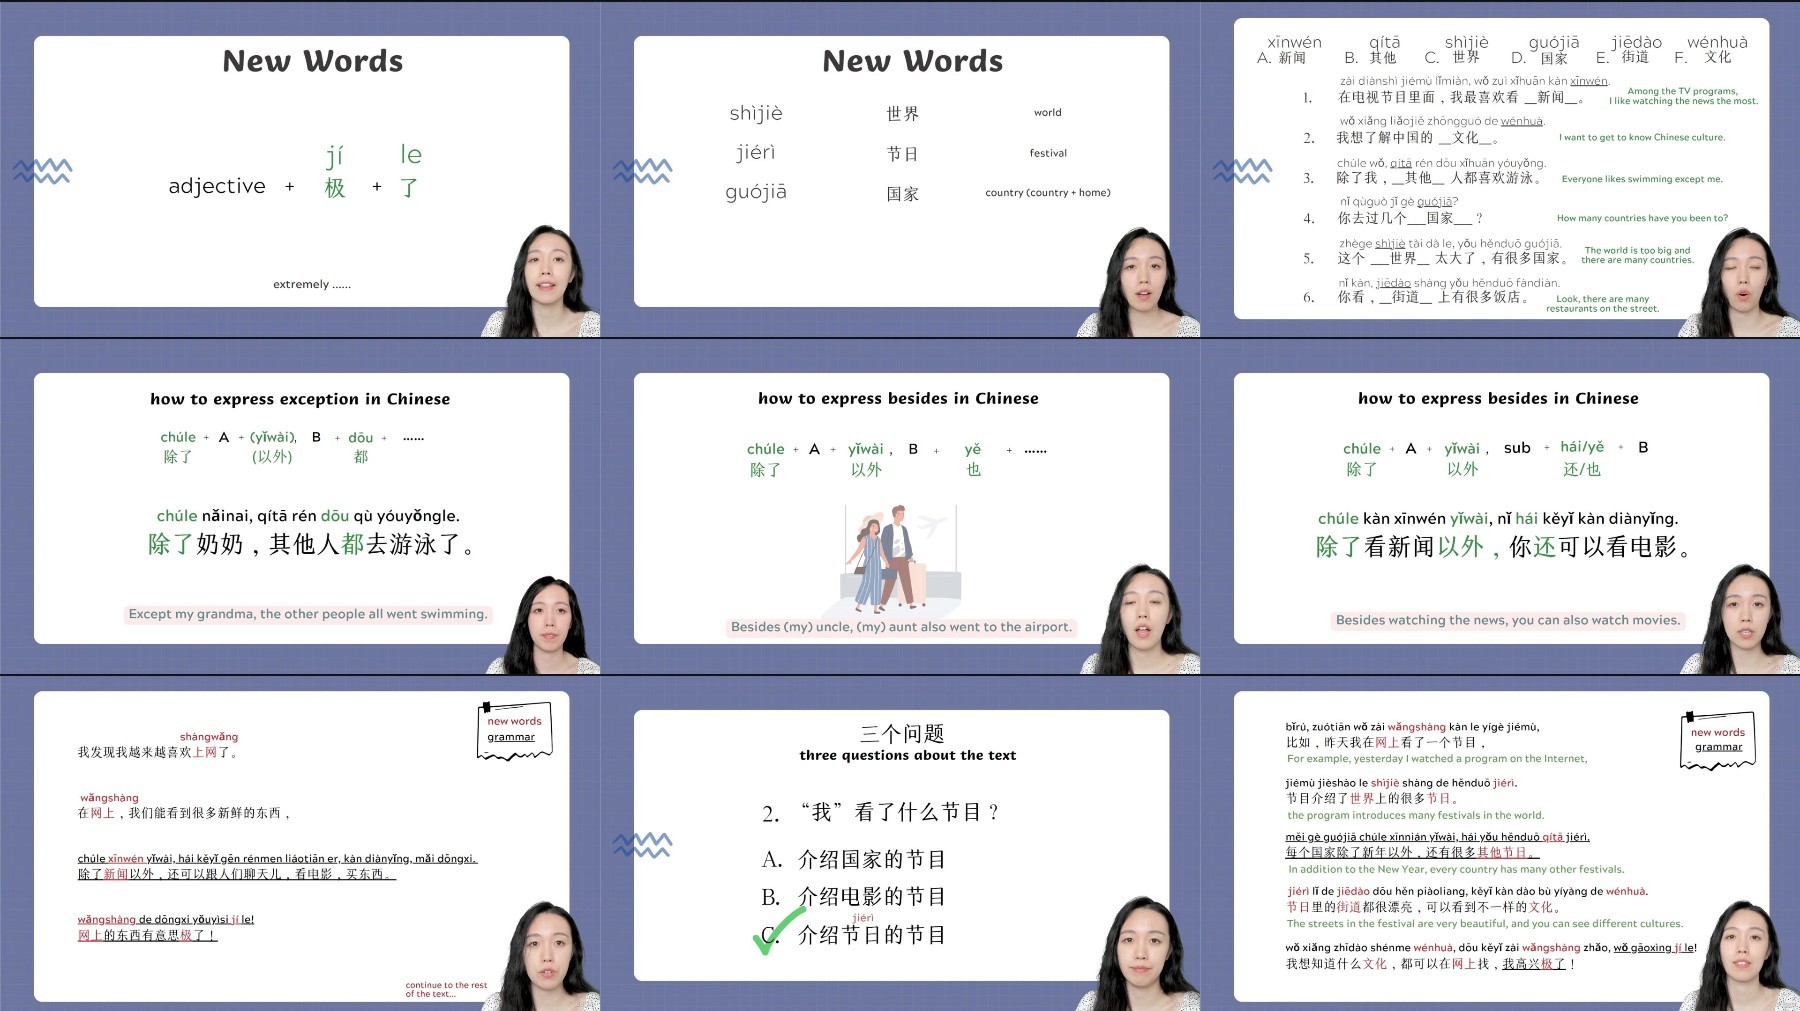 dDVMMpf0 o - Learn : From Zero To Chinese Hero - Hsk 1-3 Course